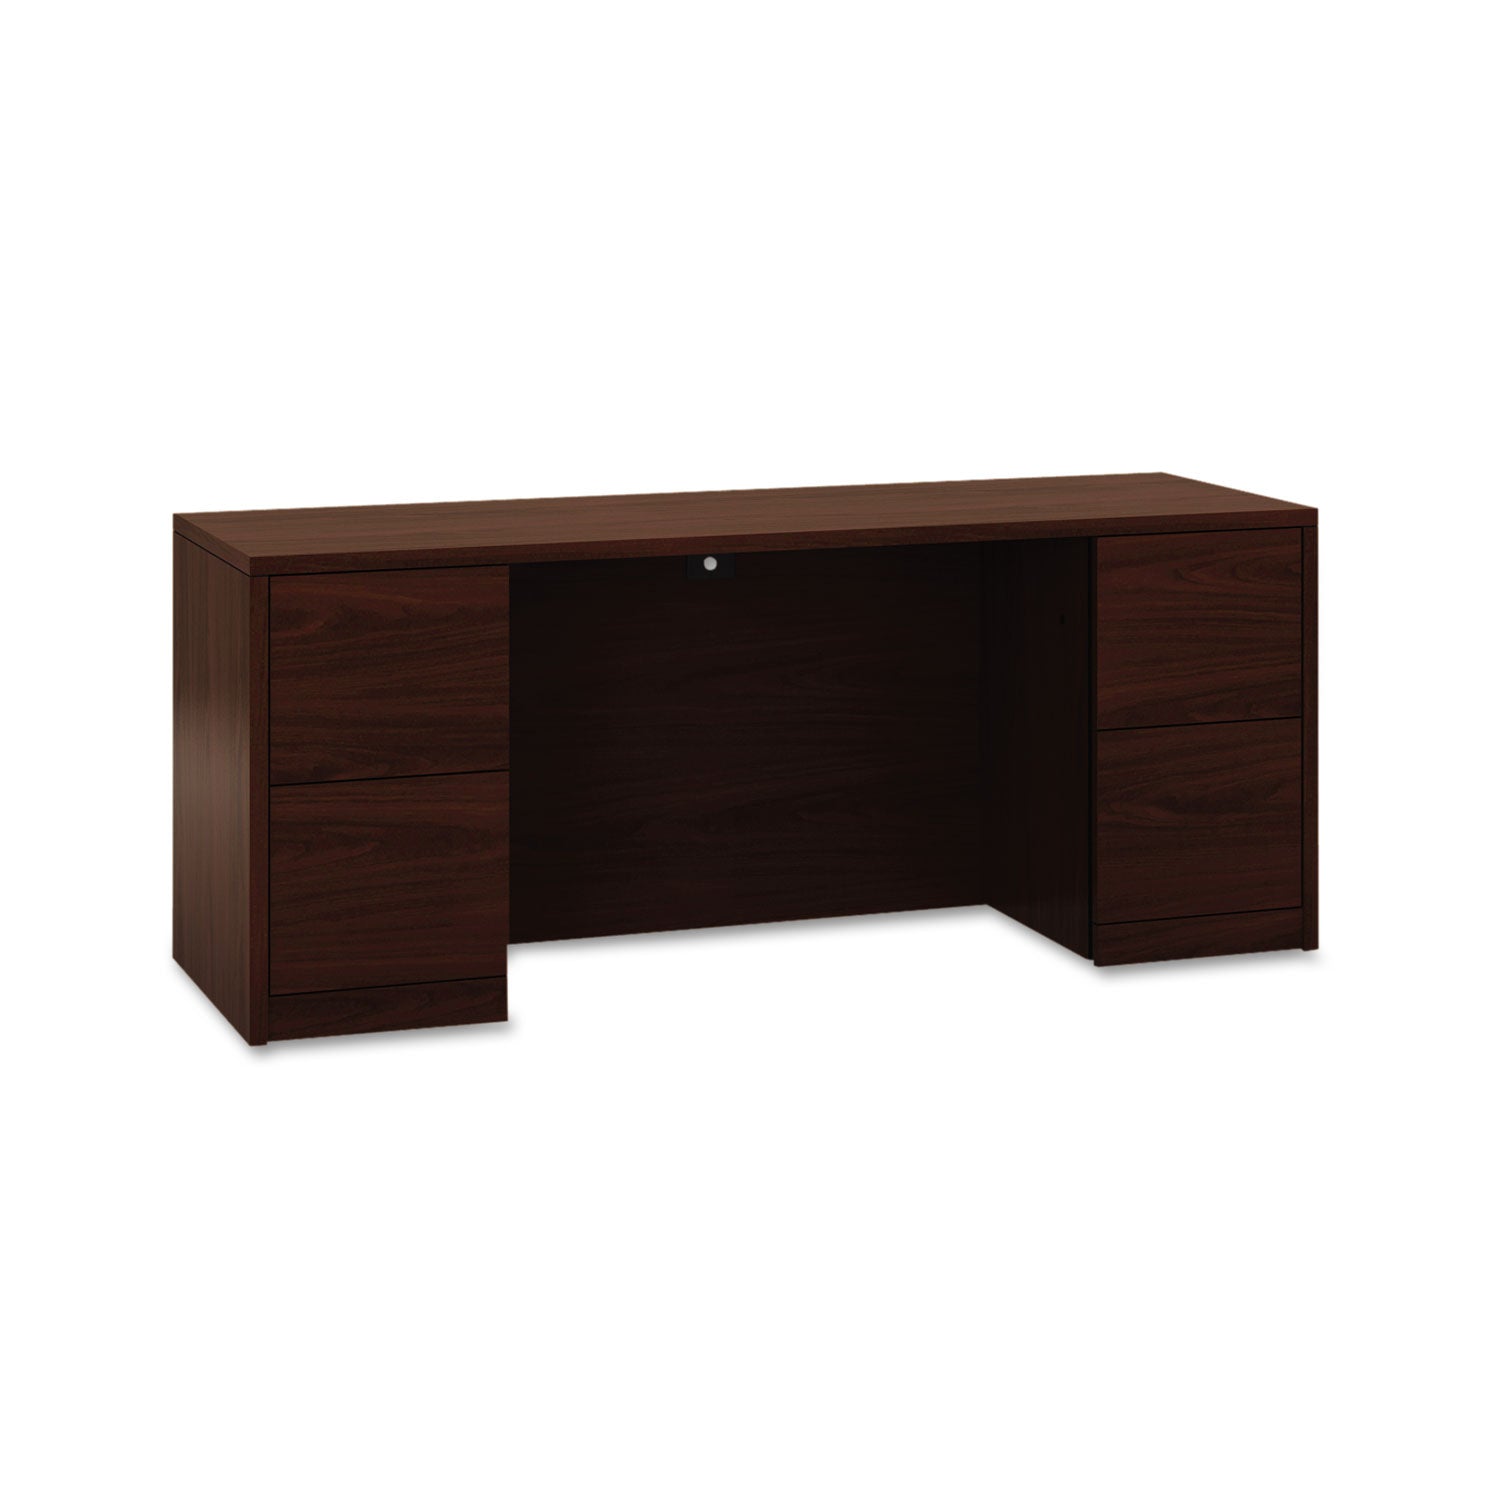 10500 Series Kneespace Credenza With Full-Height Pedestals, 72w x 24d x 29.5h, Mahogany - 